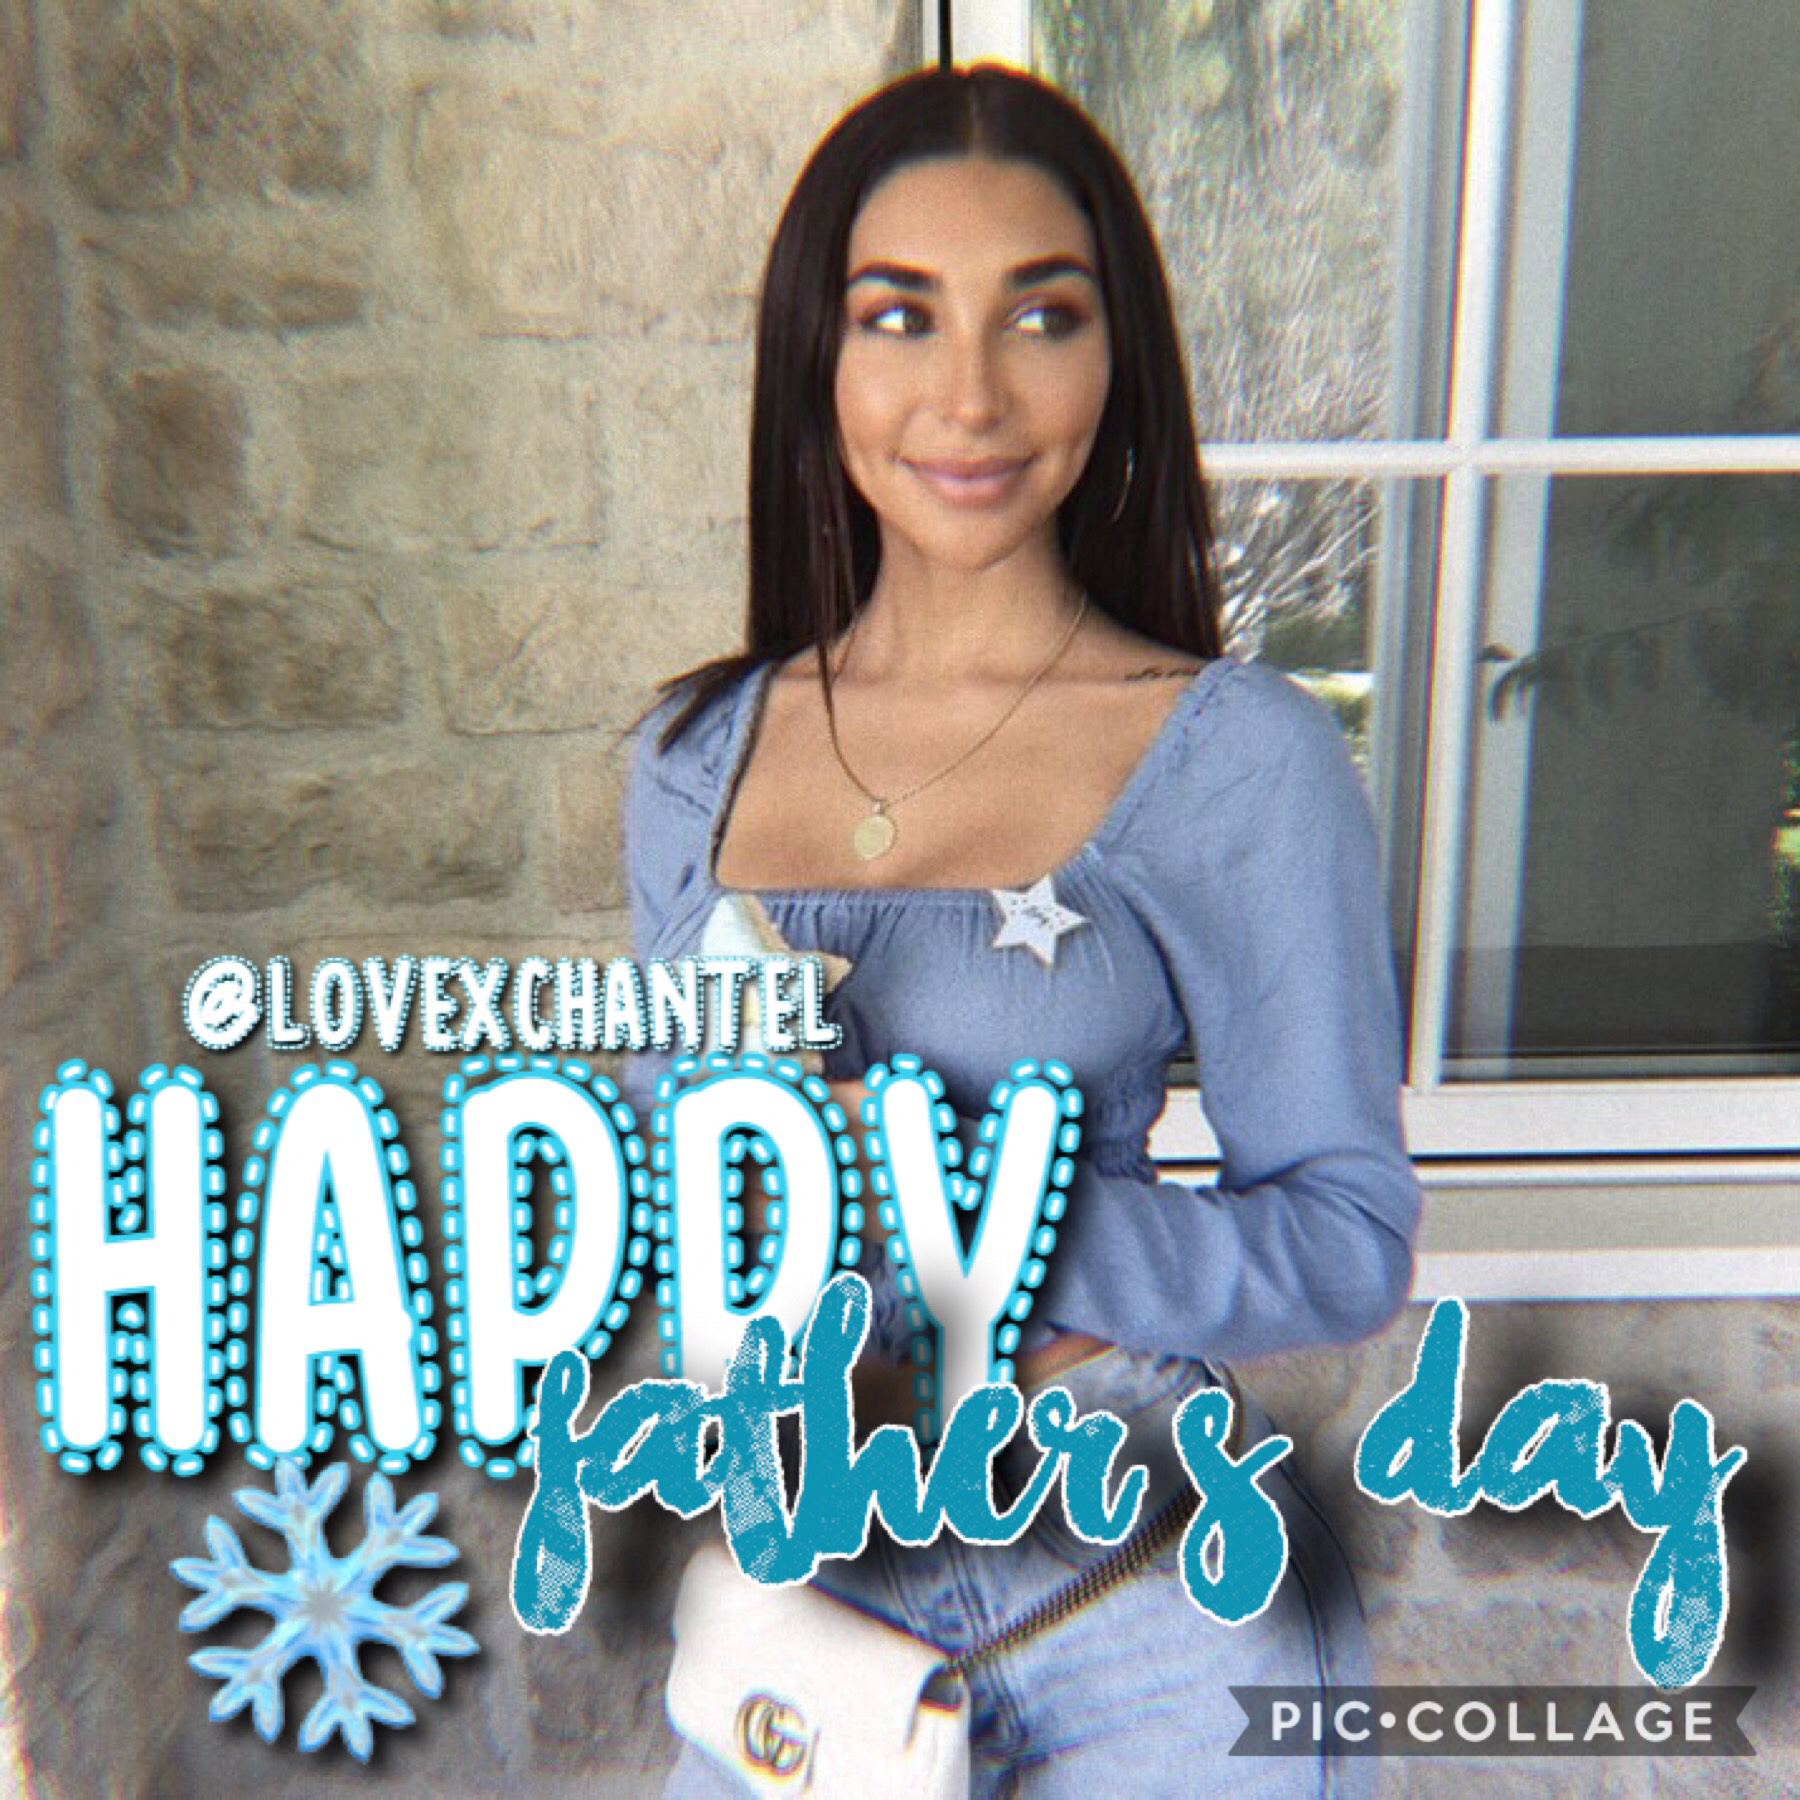 tap❄️



Hey guyssss, 
How’s your Father’s Day going??
I’m at a fathers day party and I’m bored so I made this.
        
qotd-do u like party’s🎉
aotd- yassss❄️